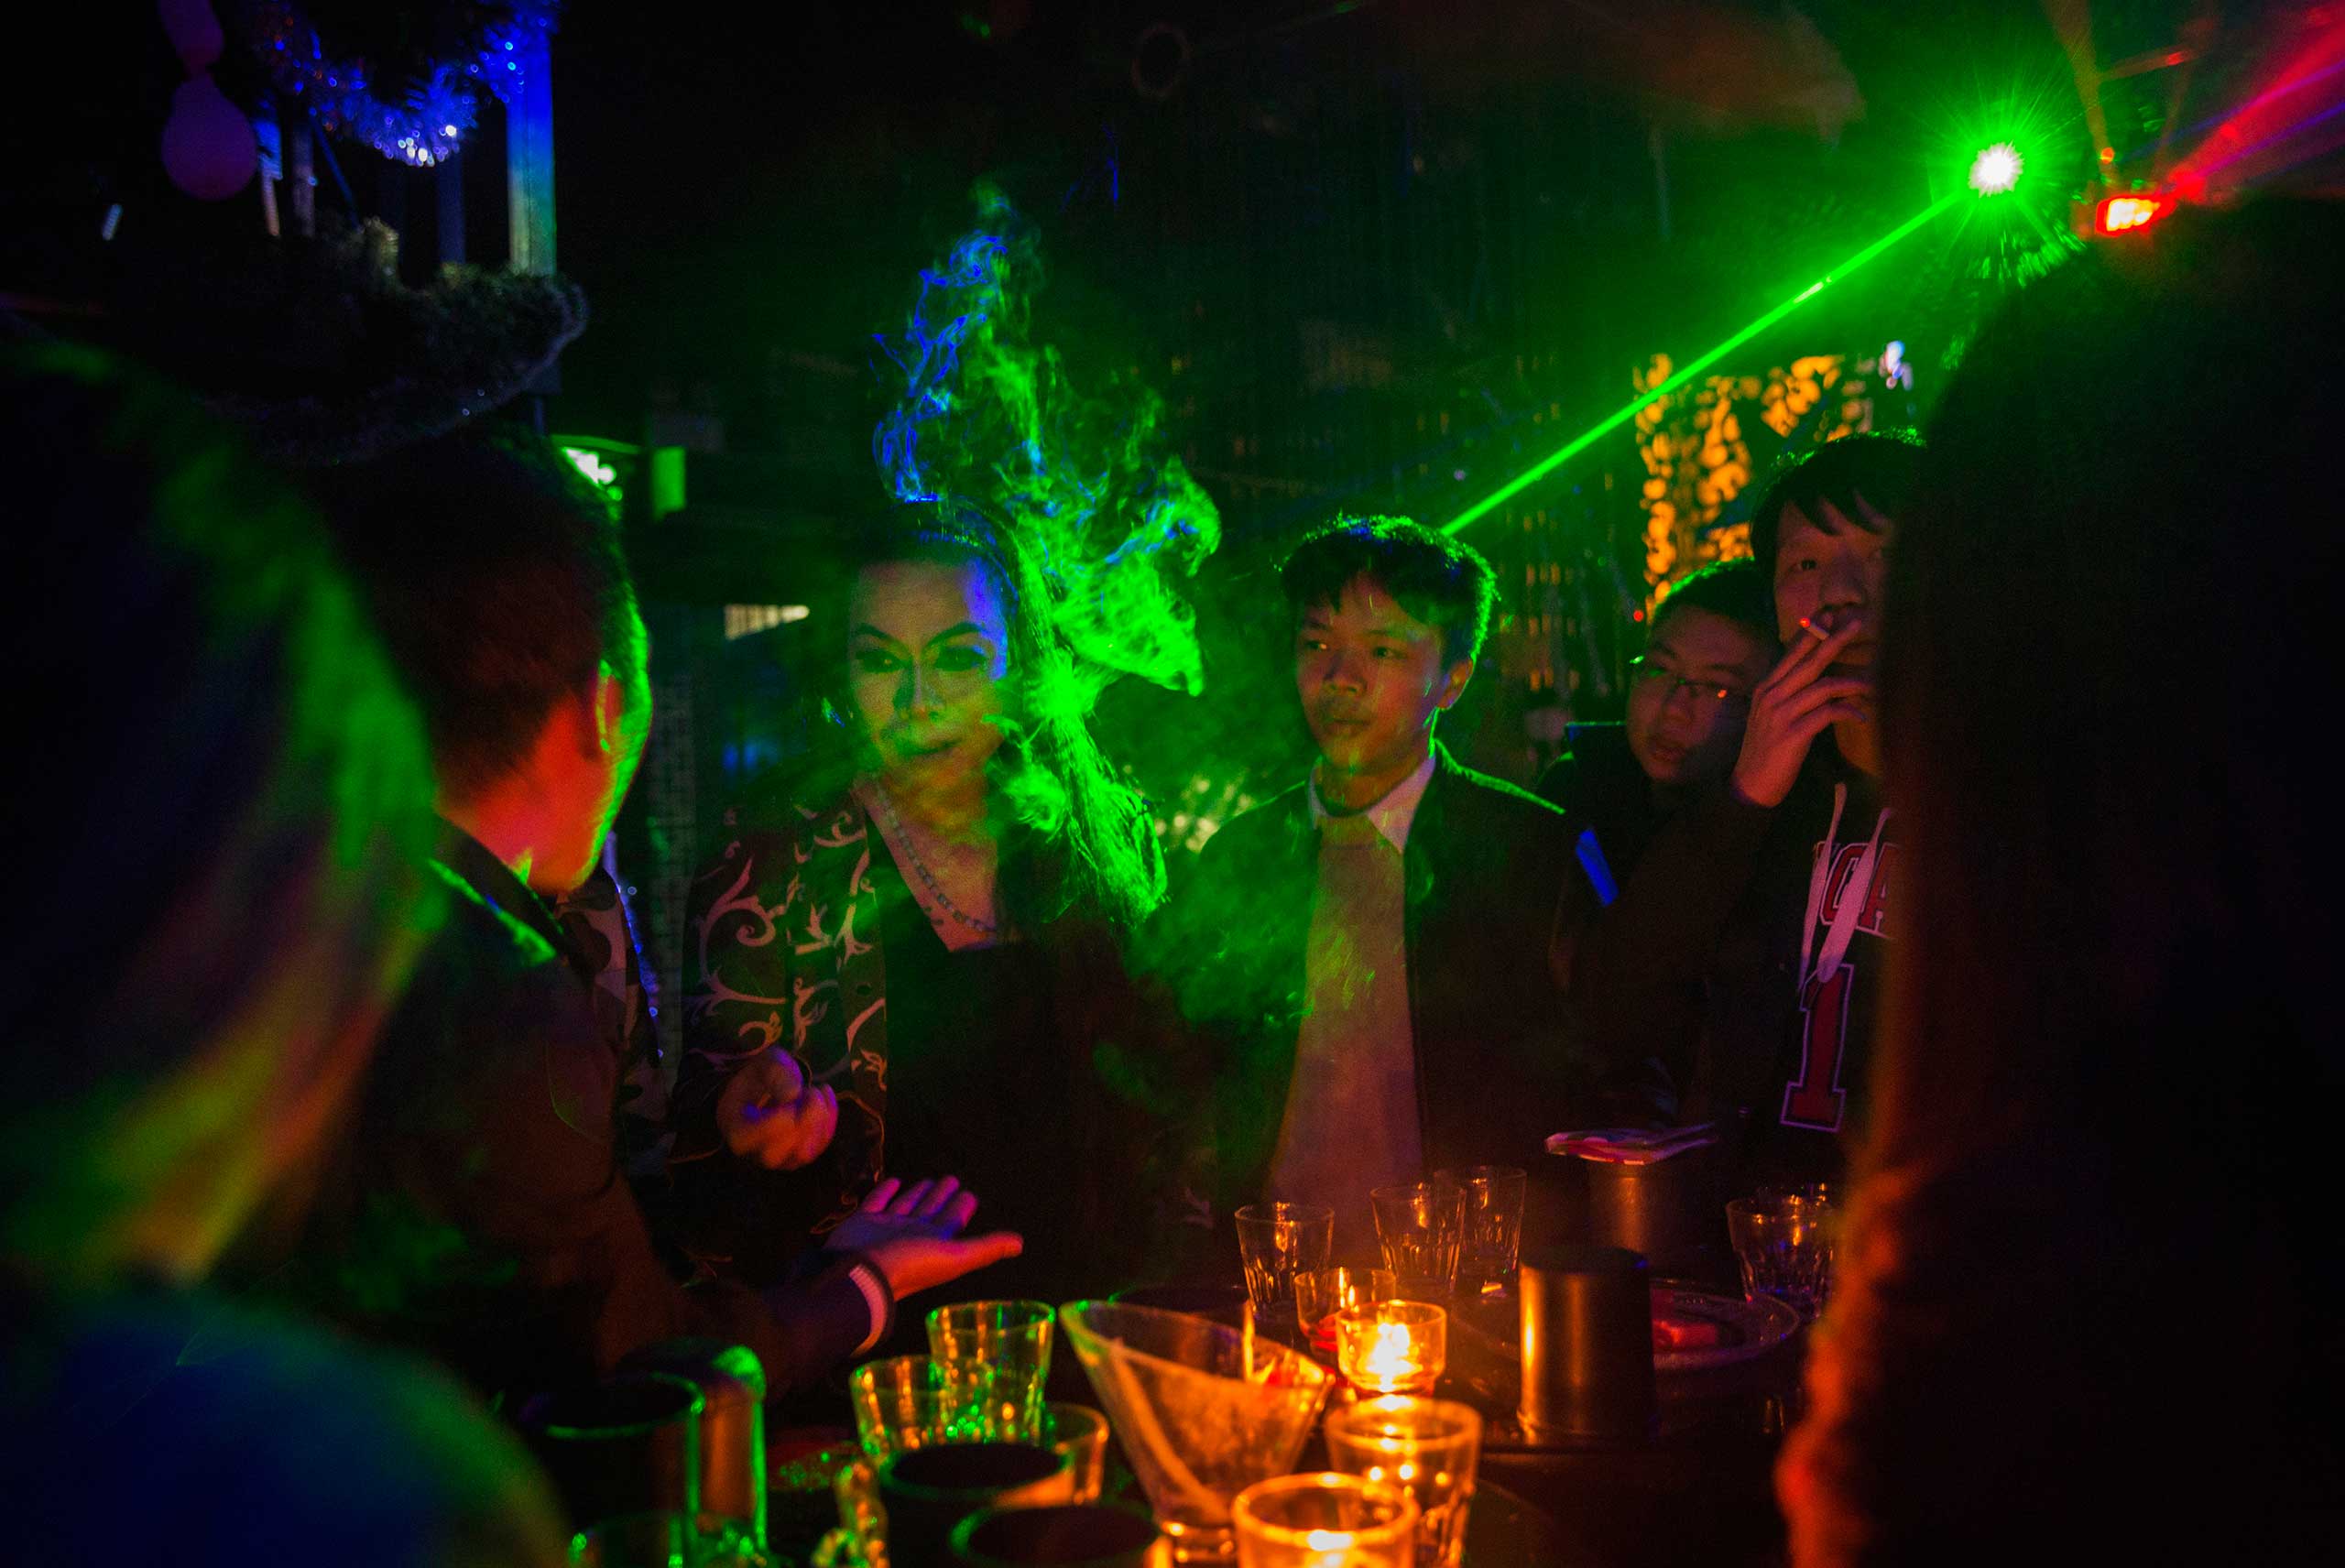 Chinese drag queen who goes by the name Shancun, third from left, has a drink with customers after performing at the Chunai 98 club in Nanning, Guangxi Province, southern China, Jan. 10, 2015.